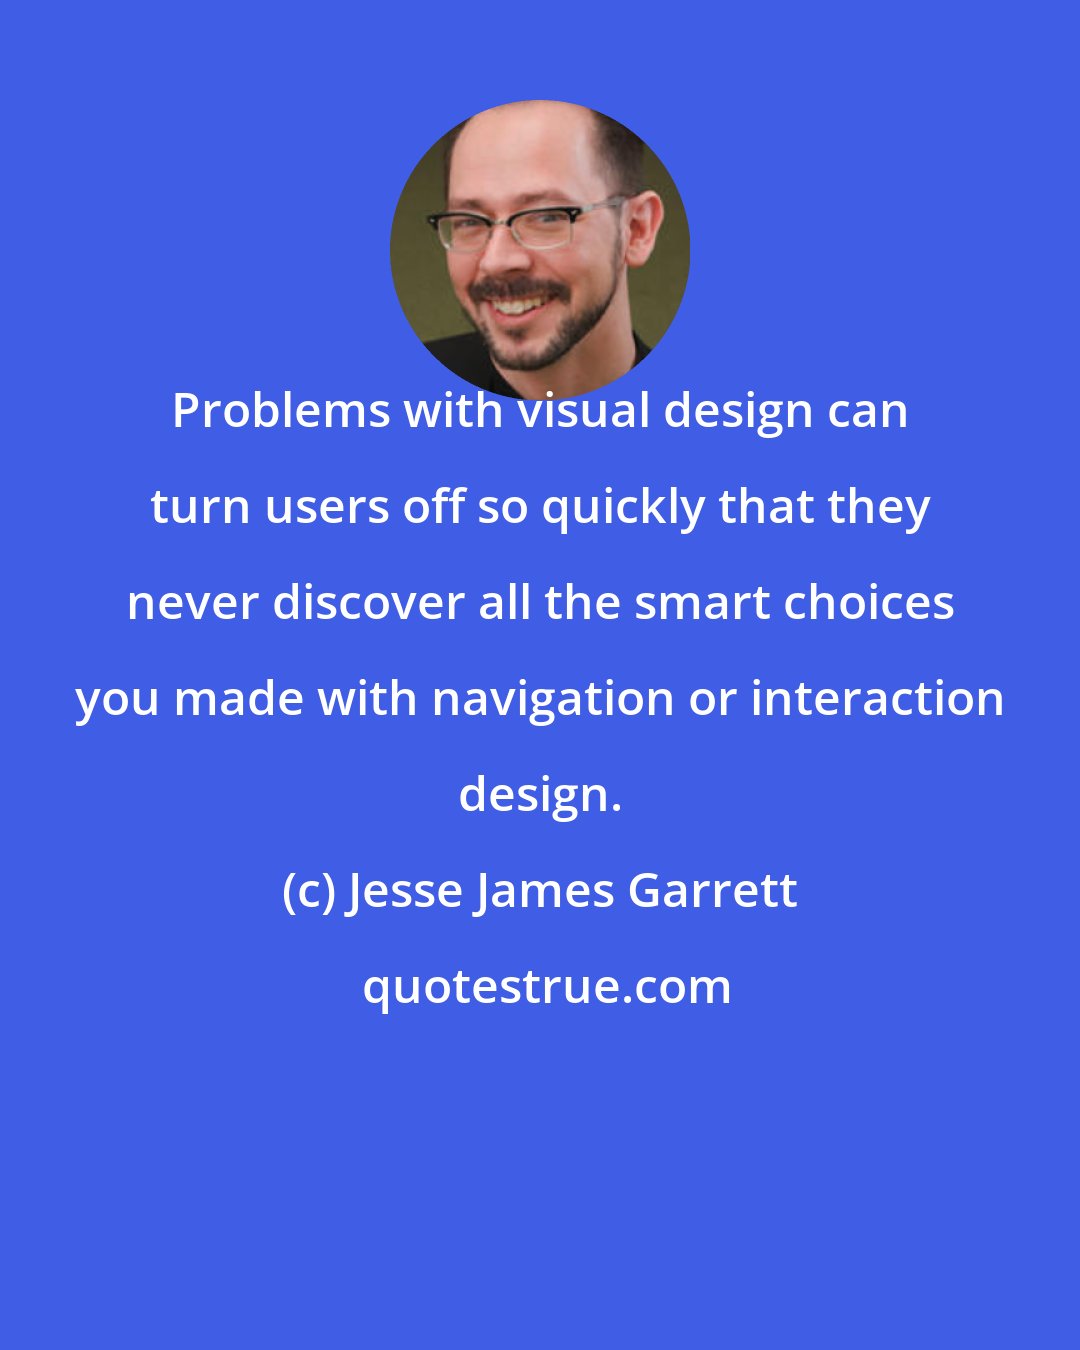 Jesse James Garrett: Problems with visual design can turn users off so quickly that they never discover all the smart choices you made with navigation or interaction design.